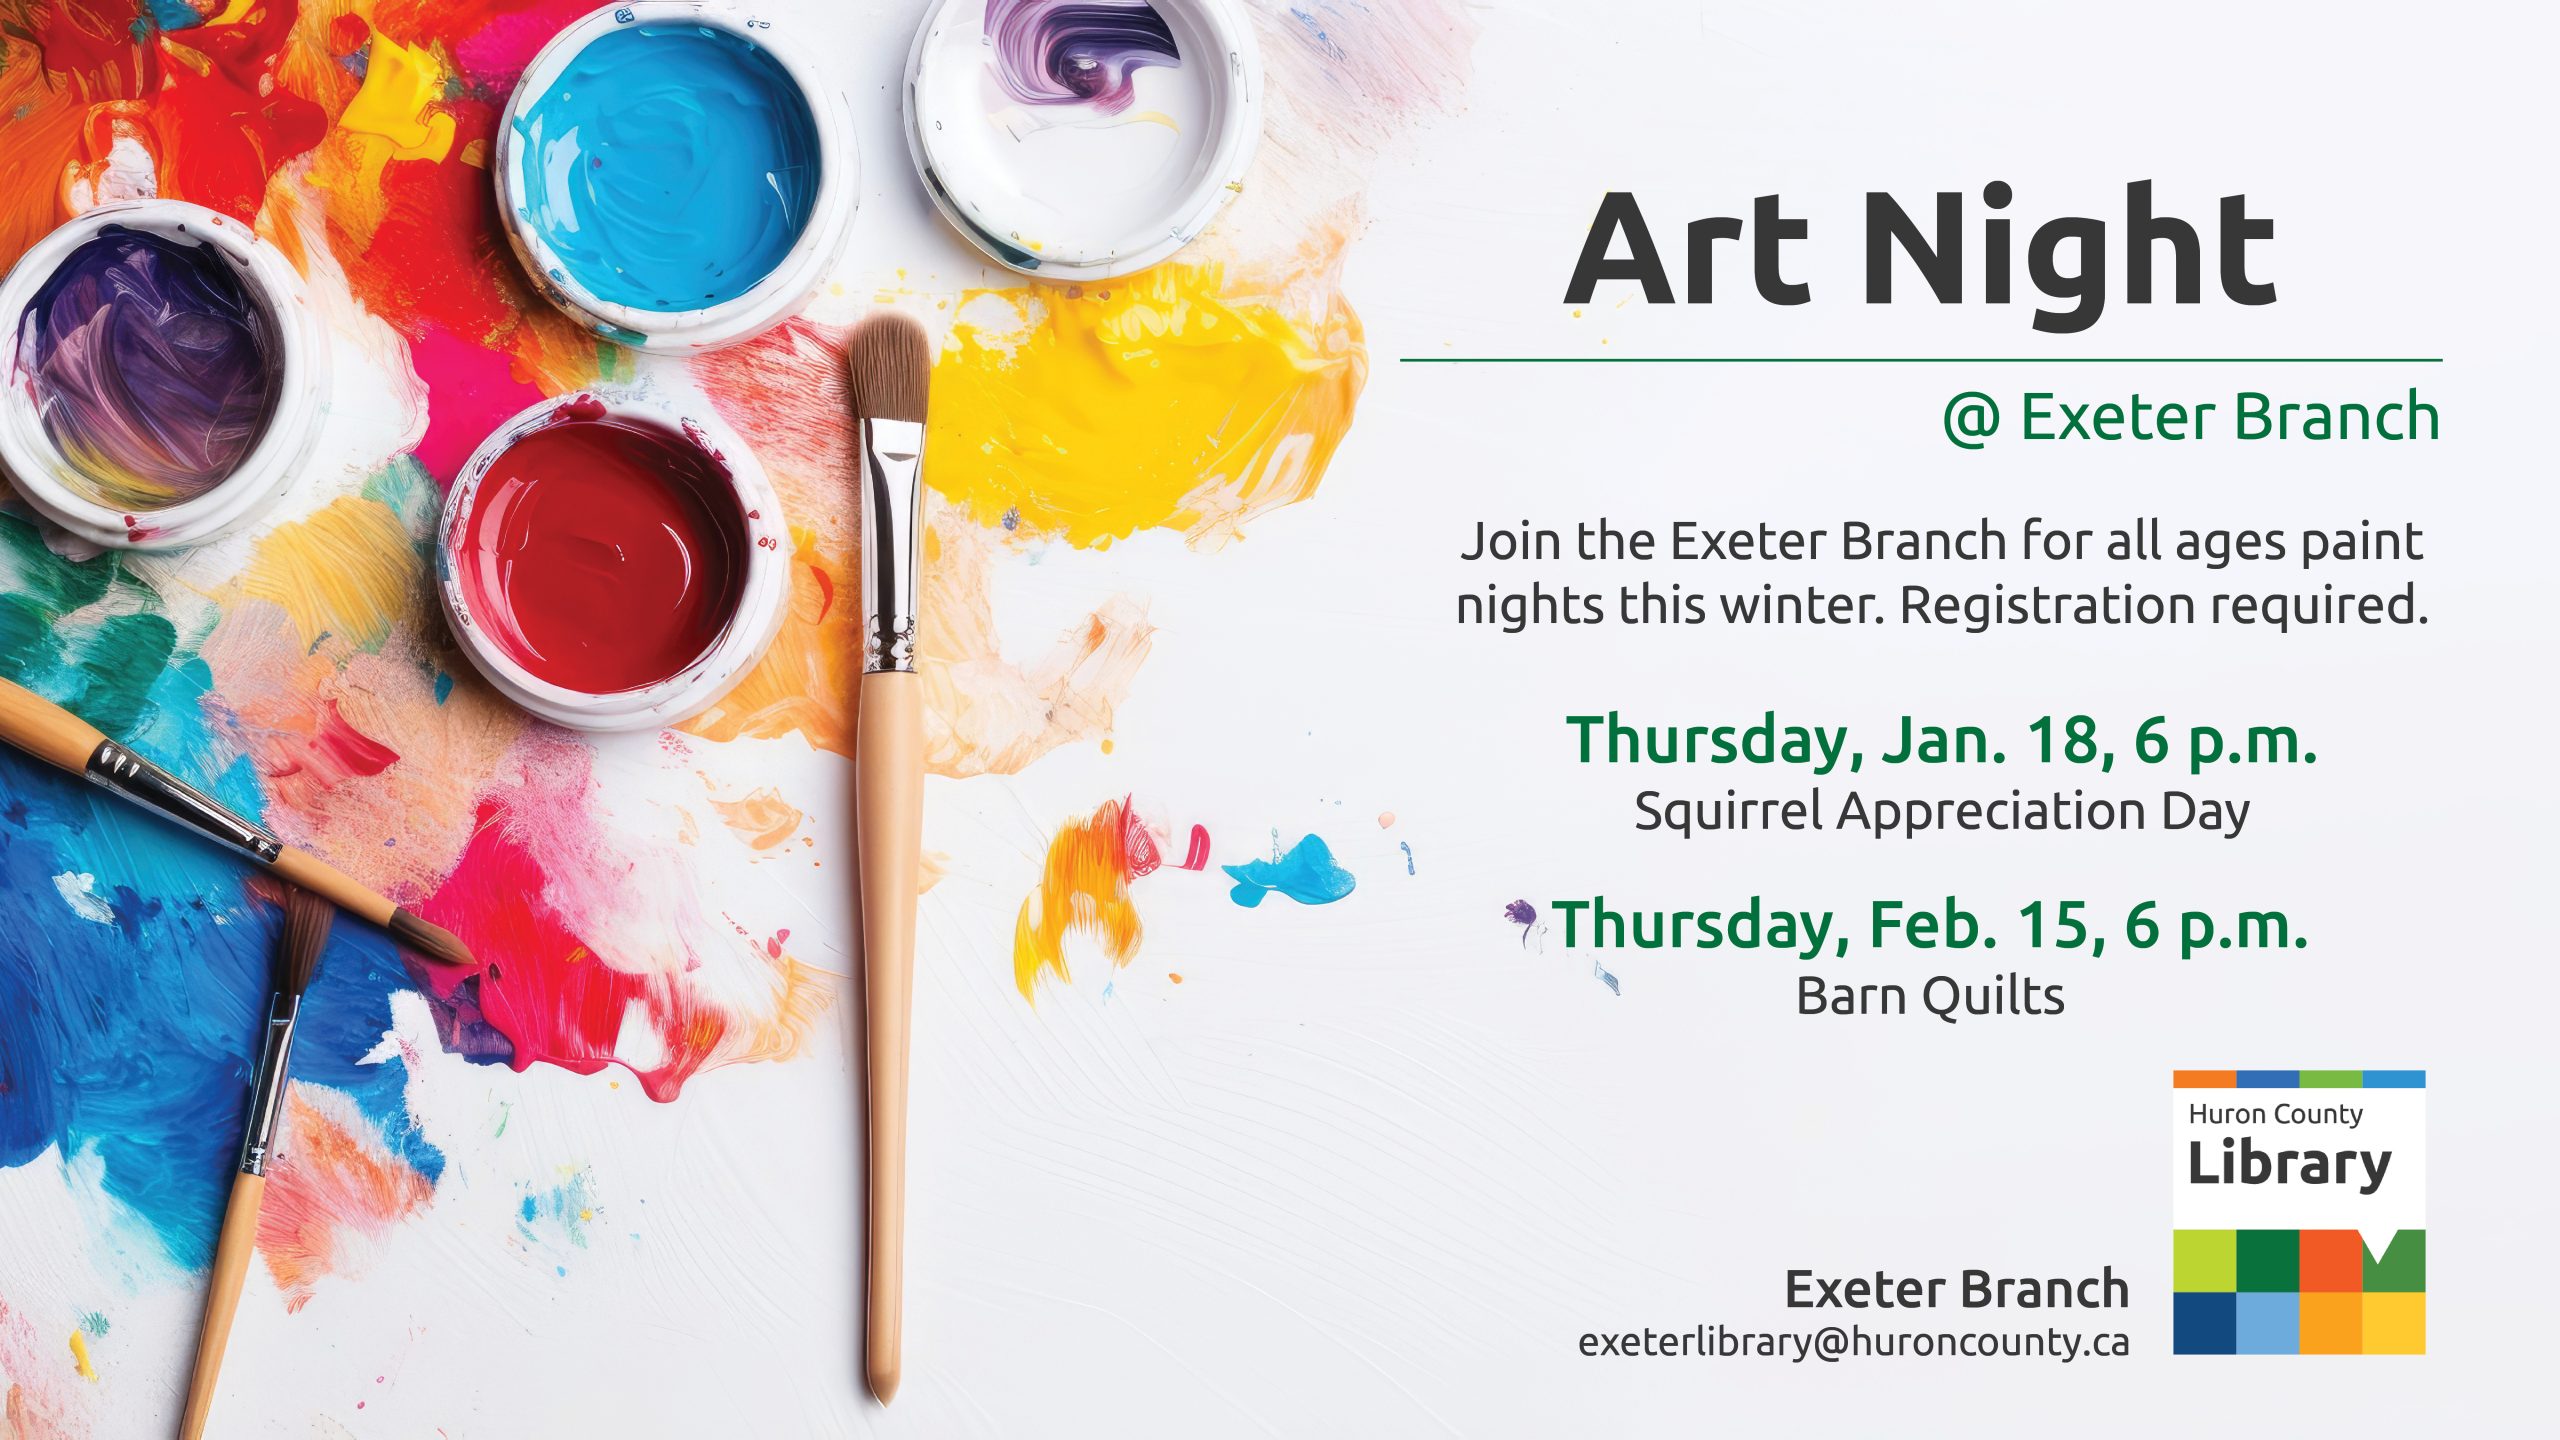 Photo of paint and brushes with text promoting art night at Exeter branch